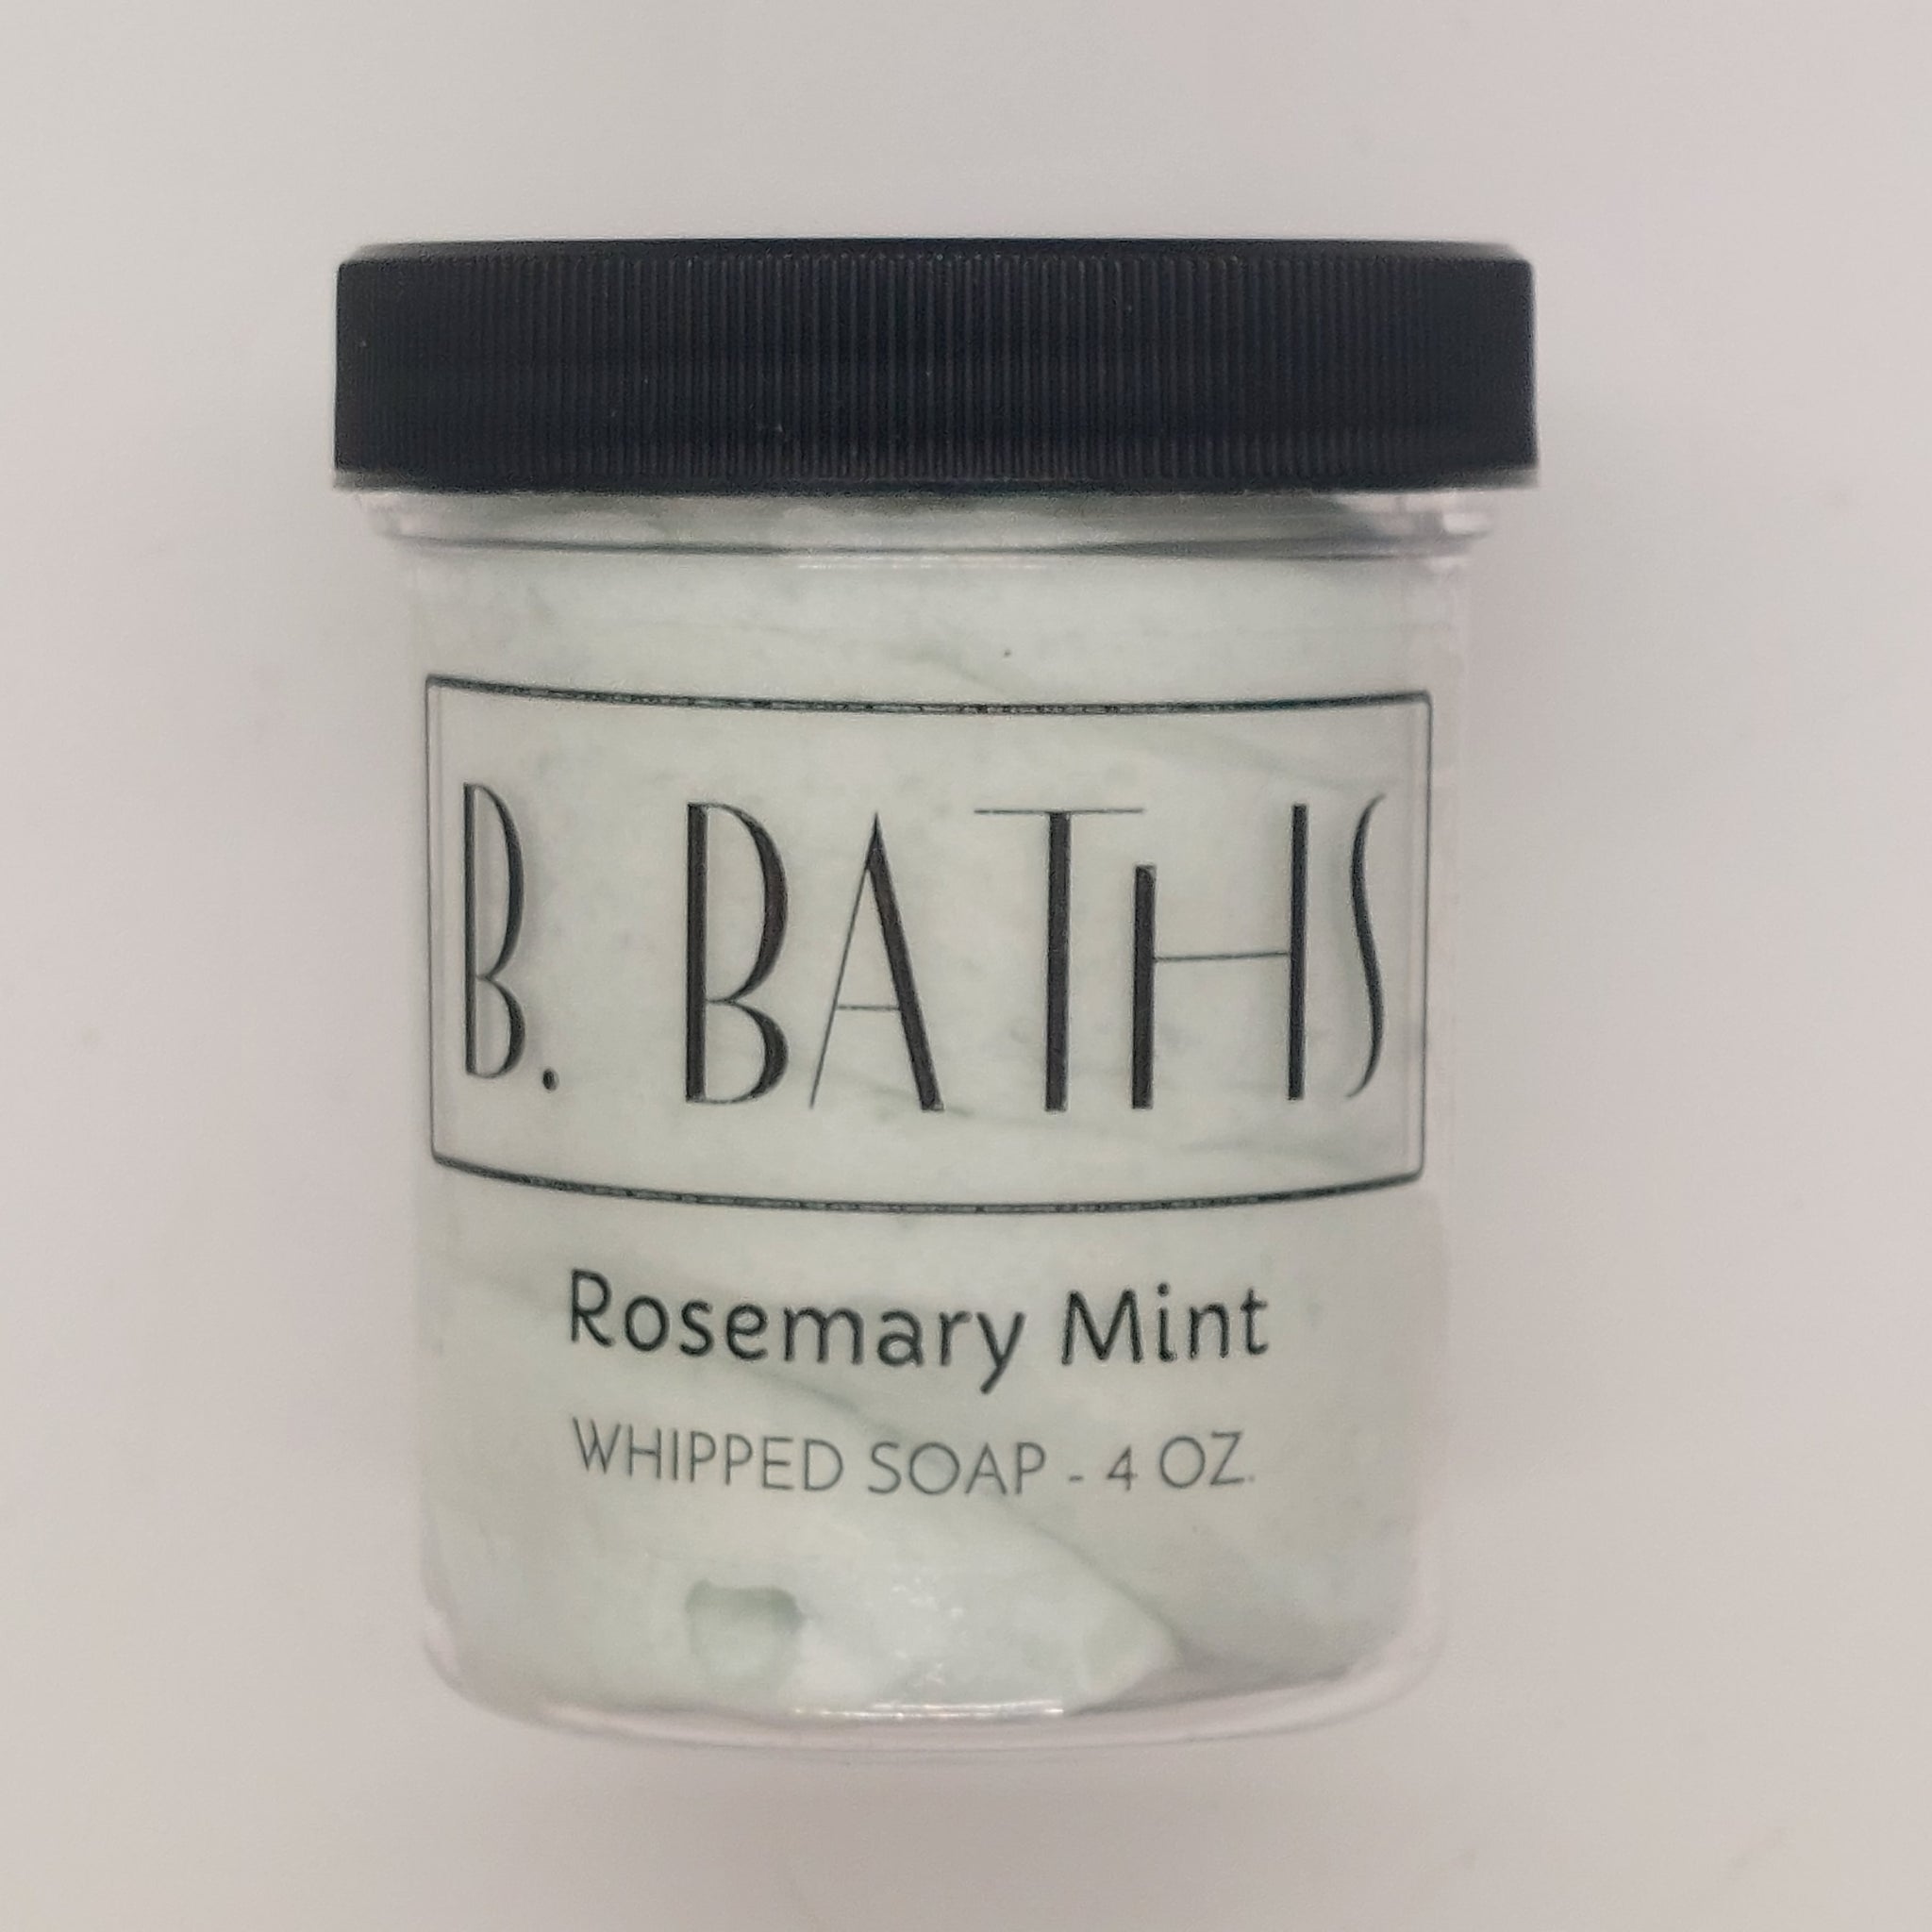 Rosemary Mint Whipped Soap